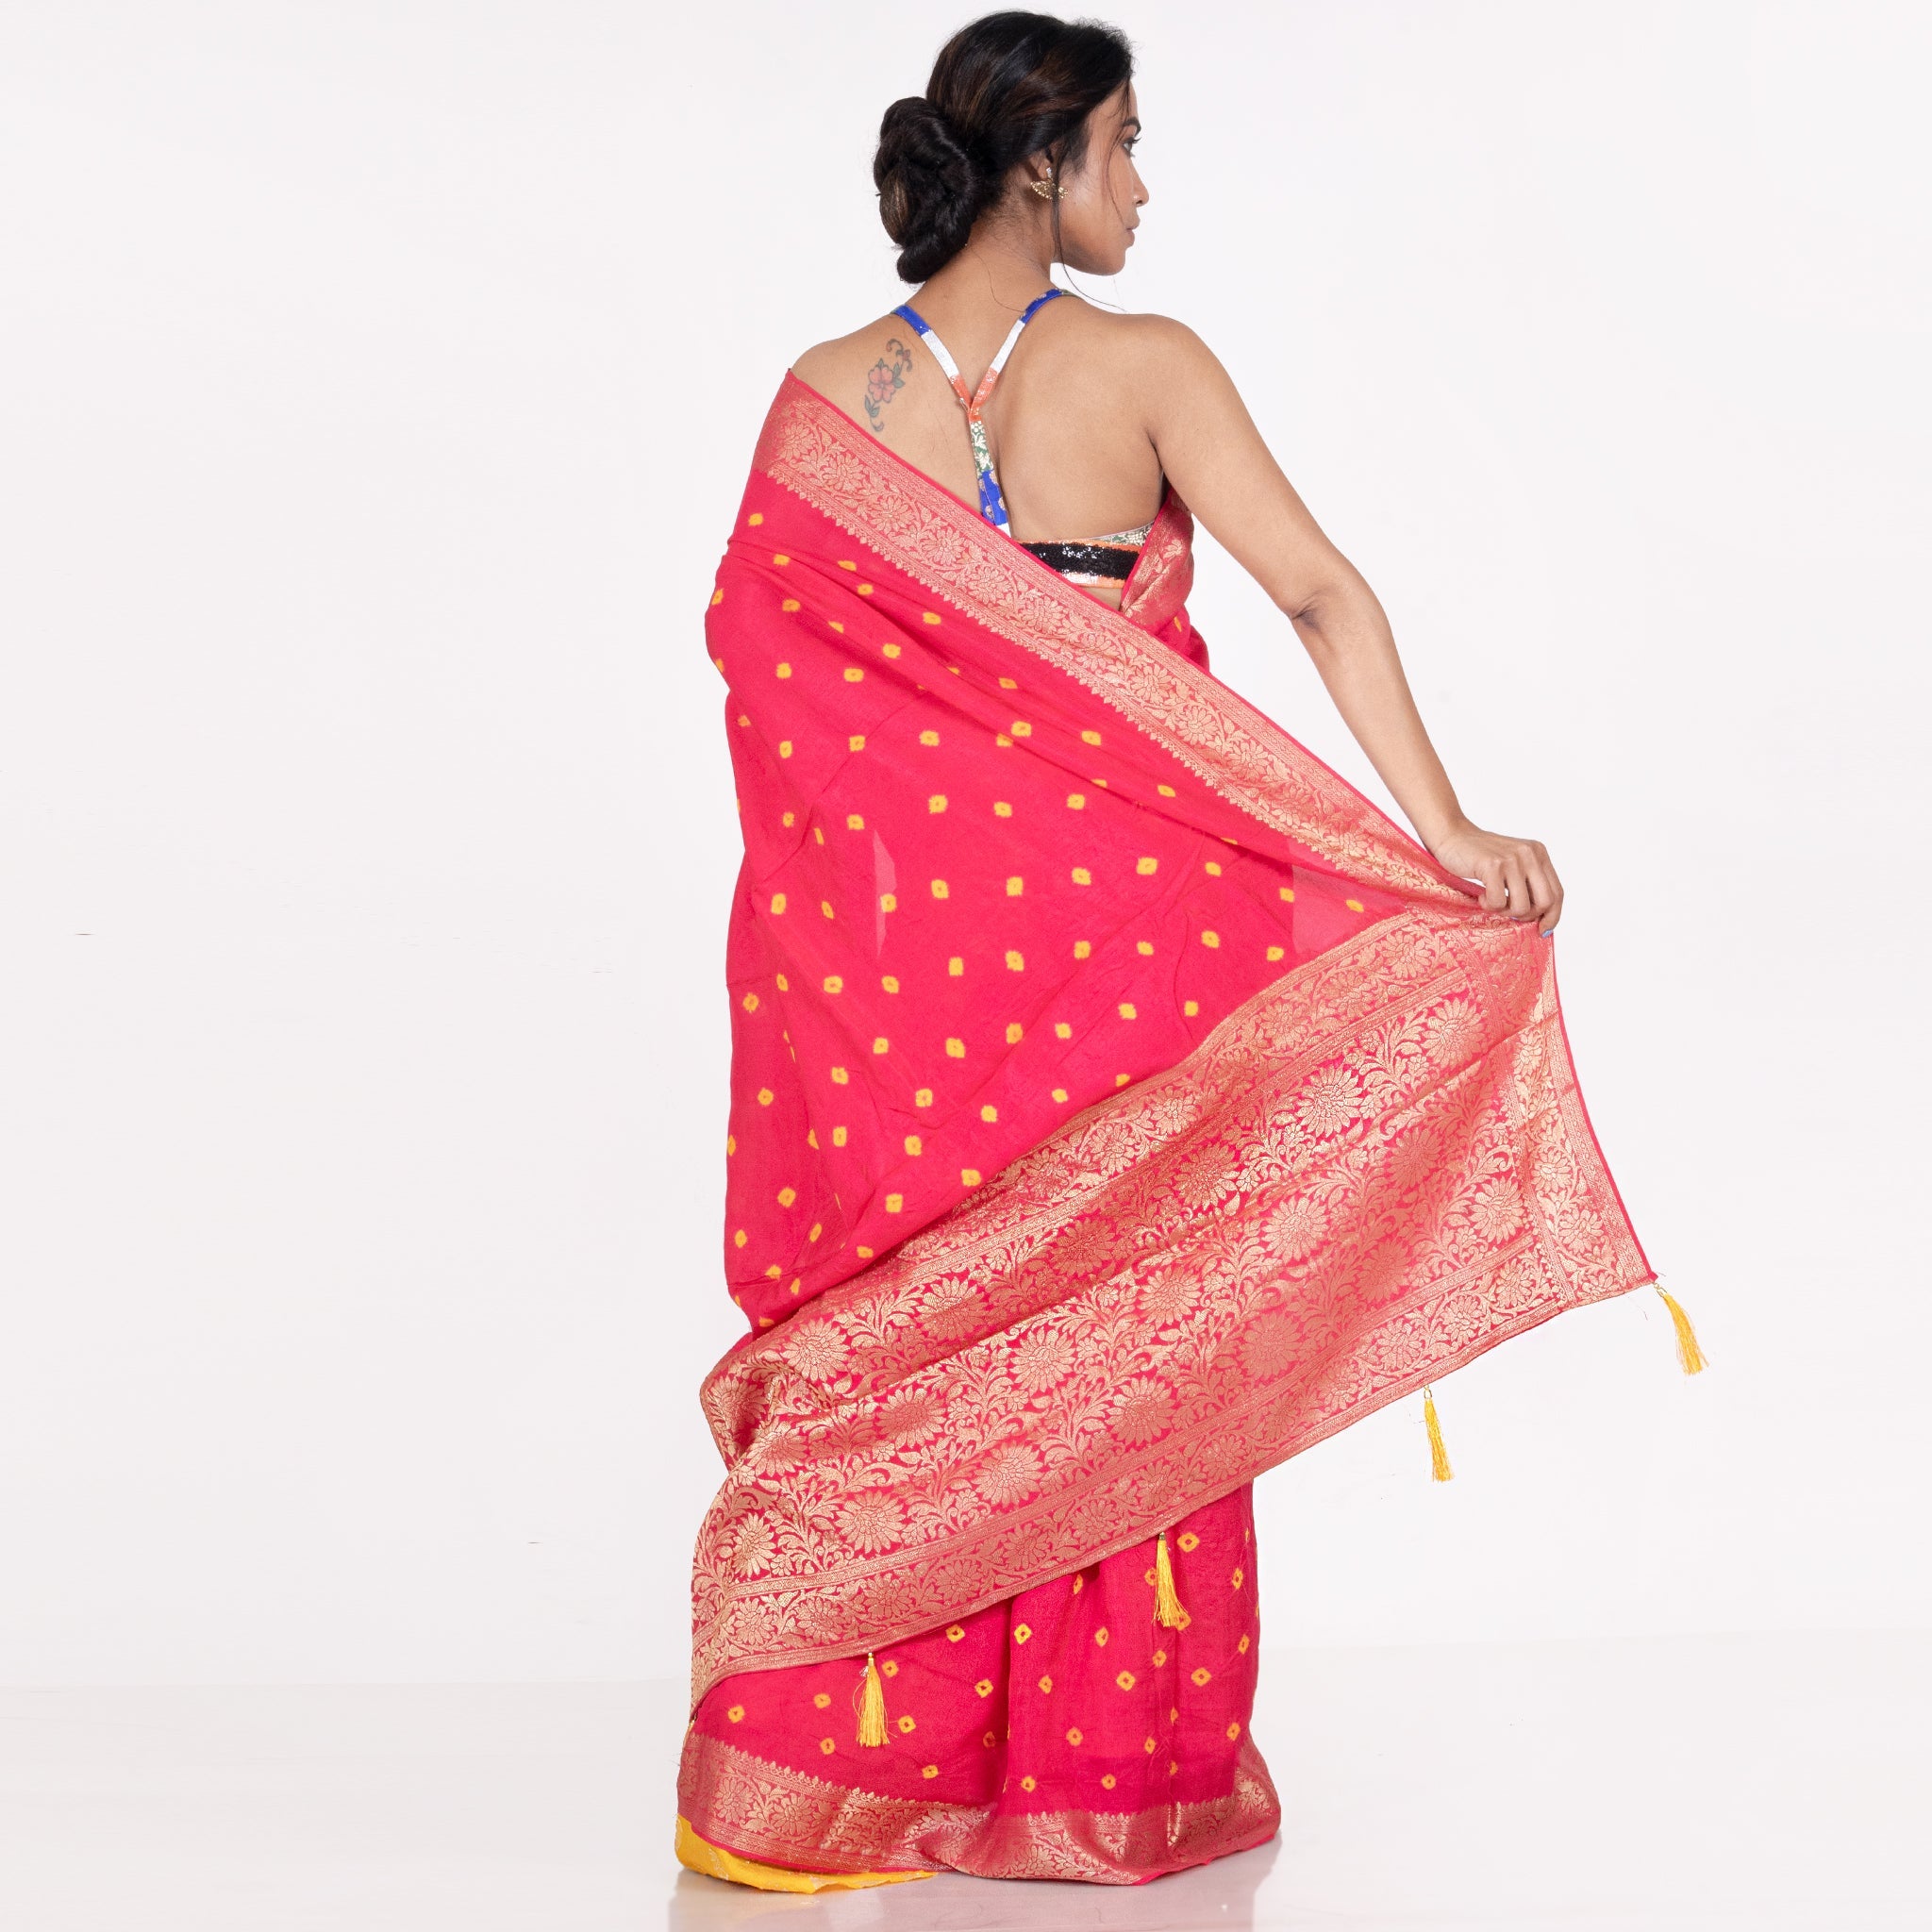 Women's Red And Yellow Pure Silk Bandhej Saree With Woven Zari Border And Pallu - Boveee